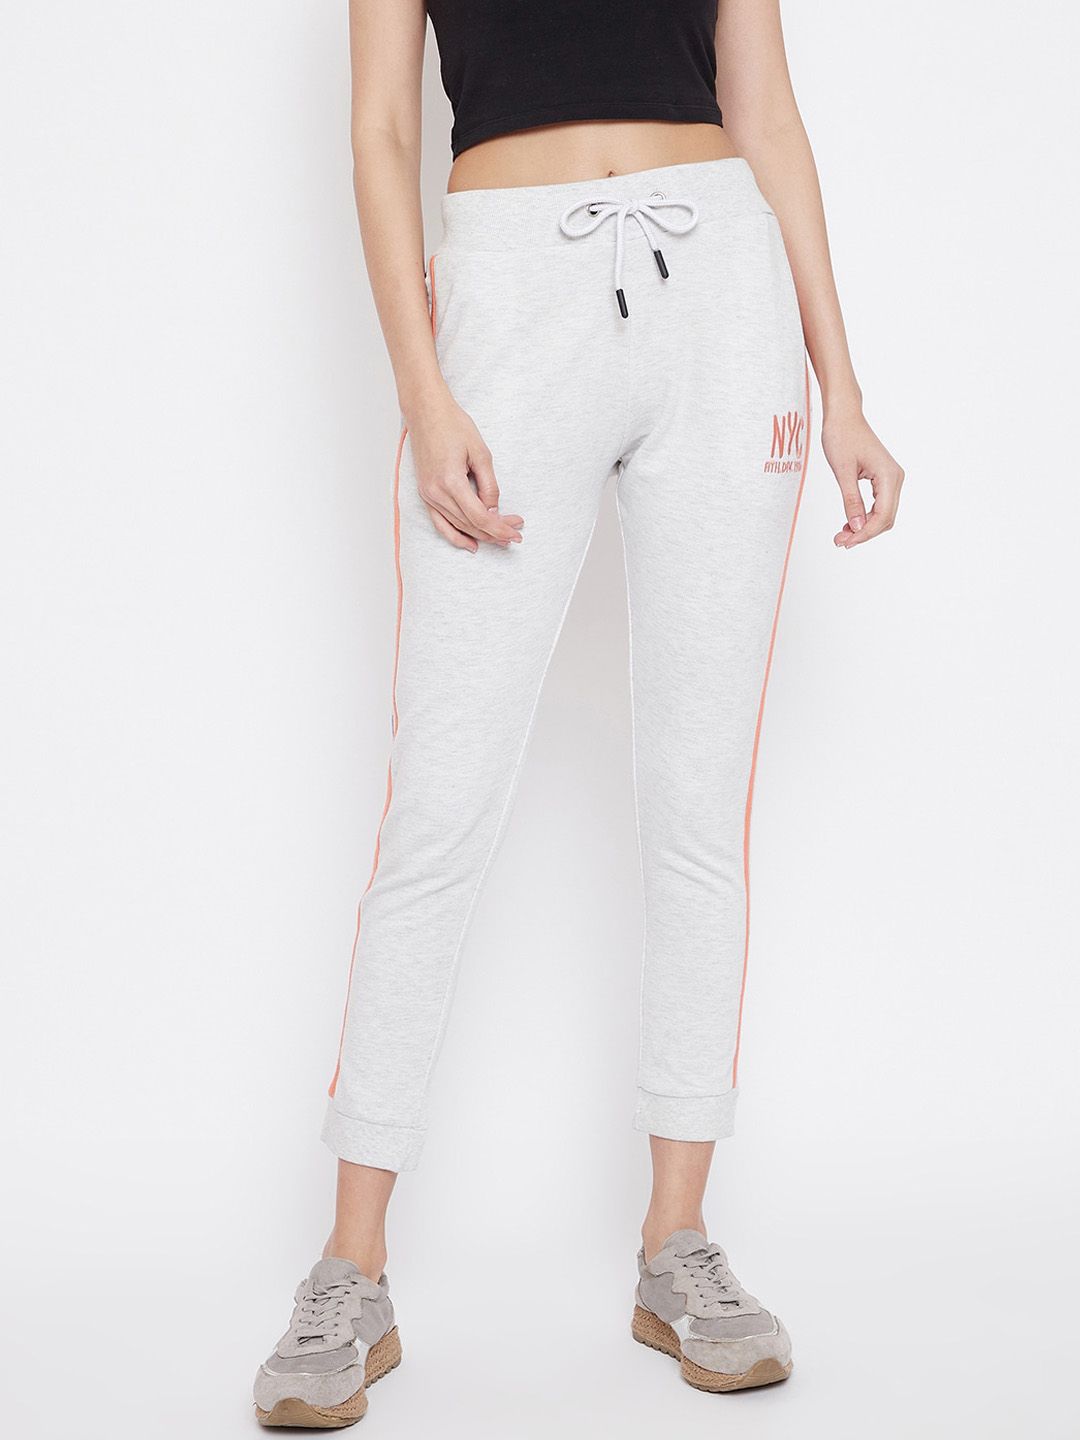 Austin wood Women Grey Solid Slim-Fit Joggers Price in India